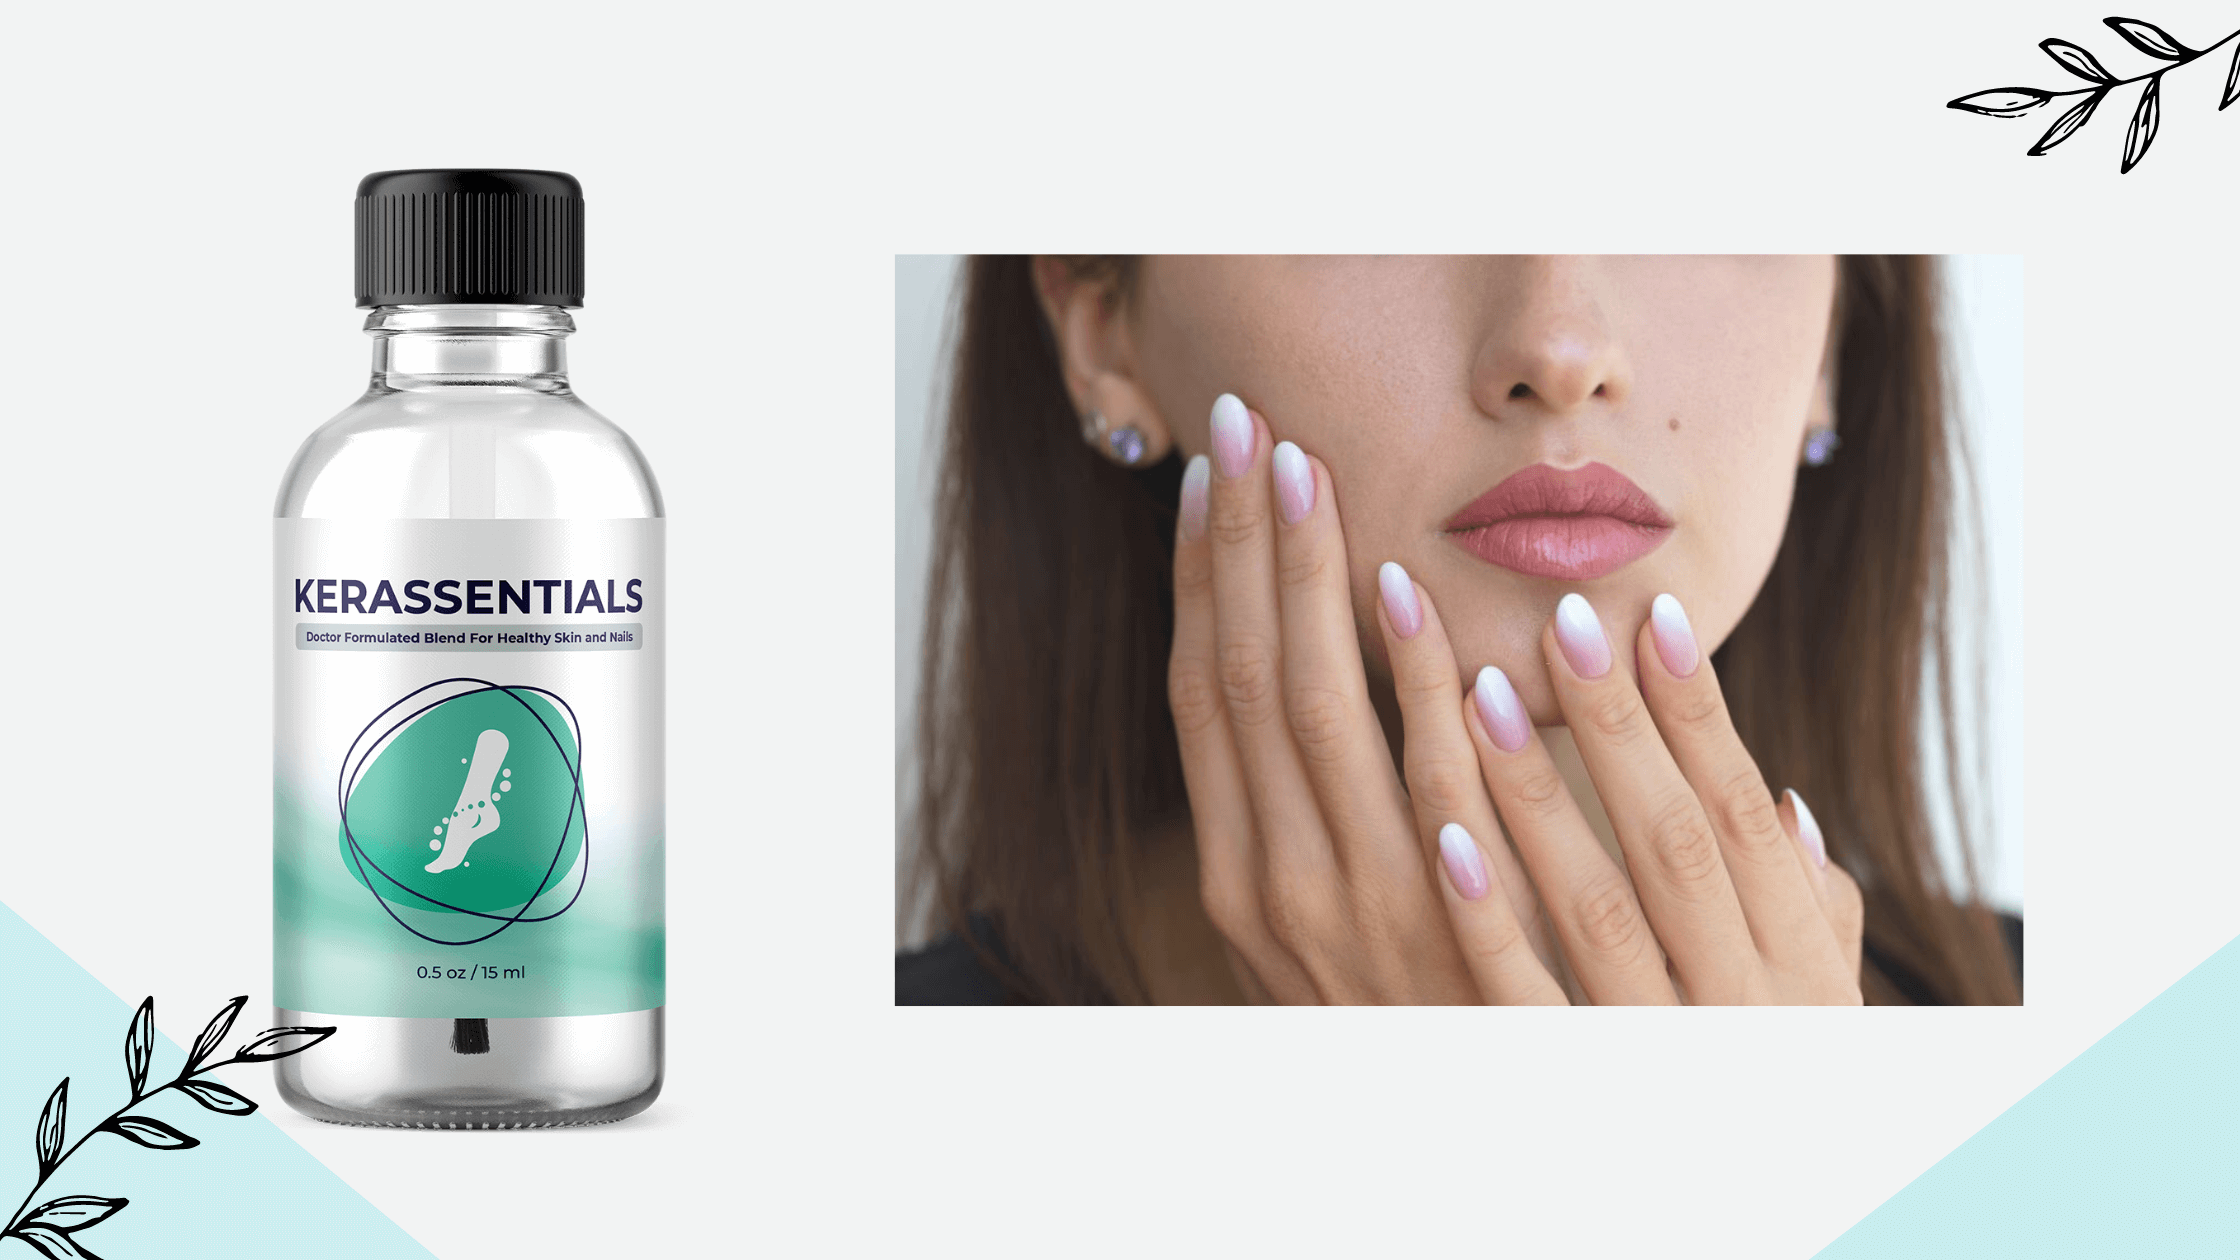 Kerassentials Reviews Oil For Toenail Fungus Alert – [Shocking Scam or Legit] -  Does it Works? Truth Revealed!